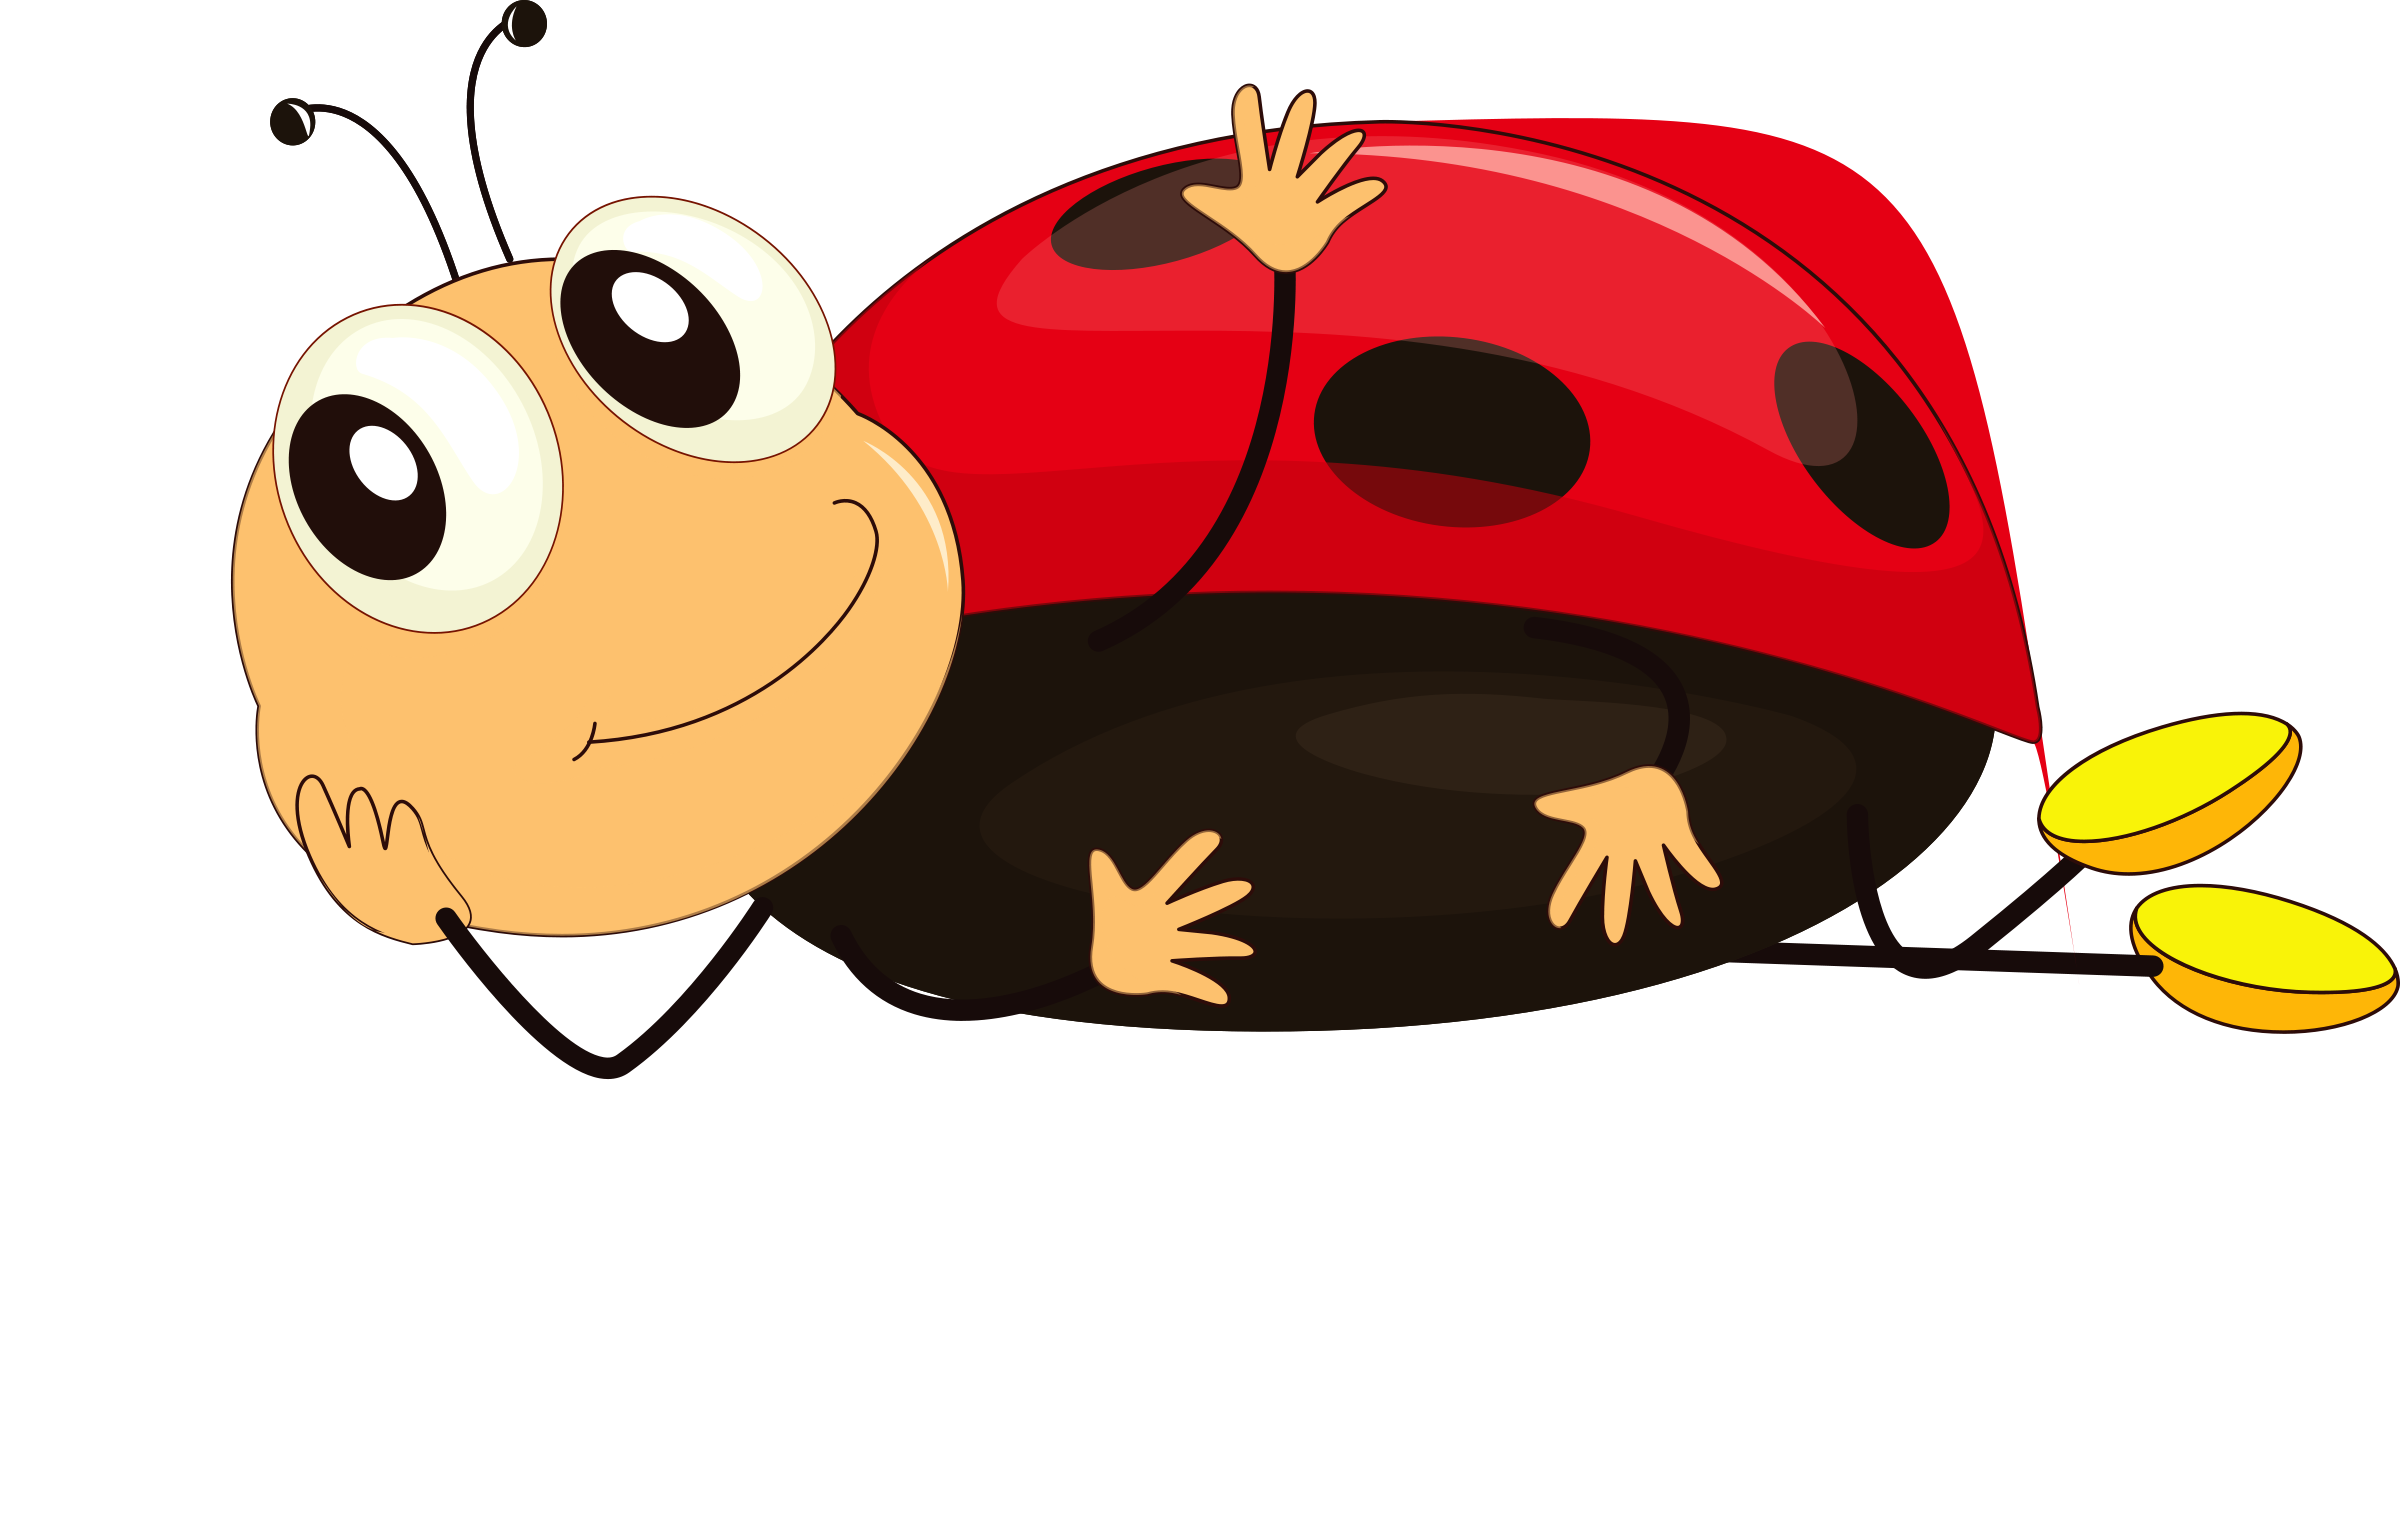 Ladybug Cute Insect PNG Transparent Image